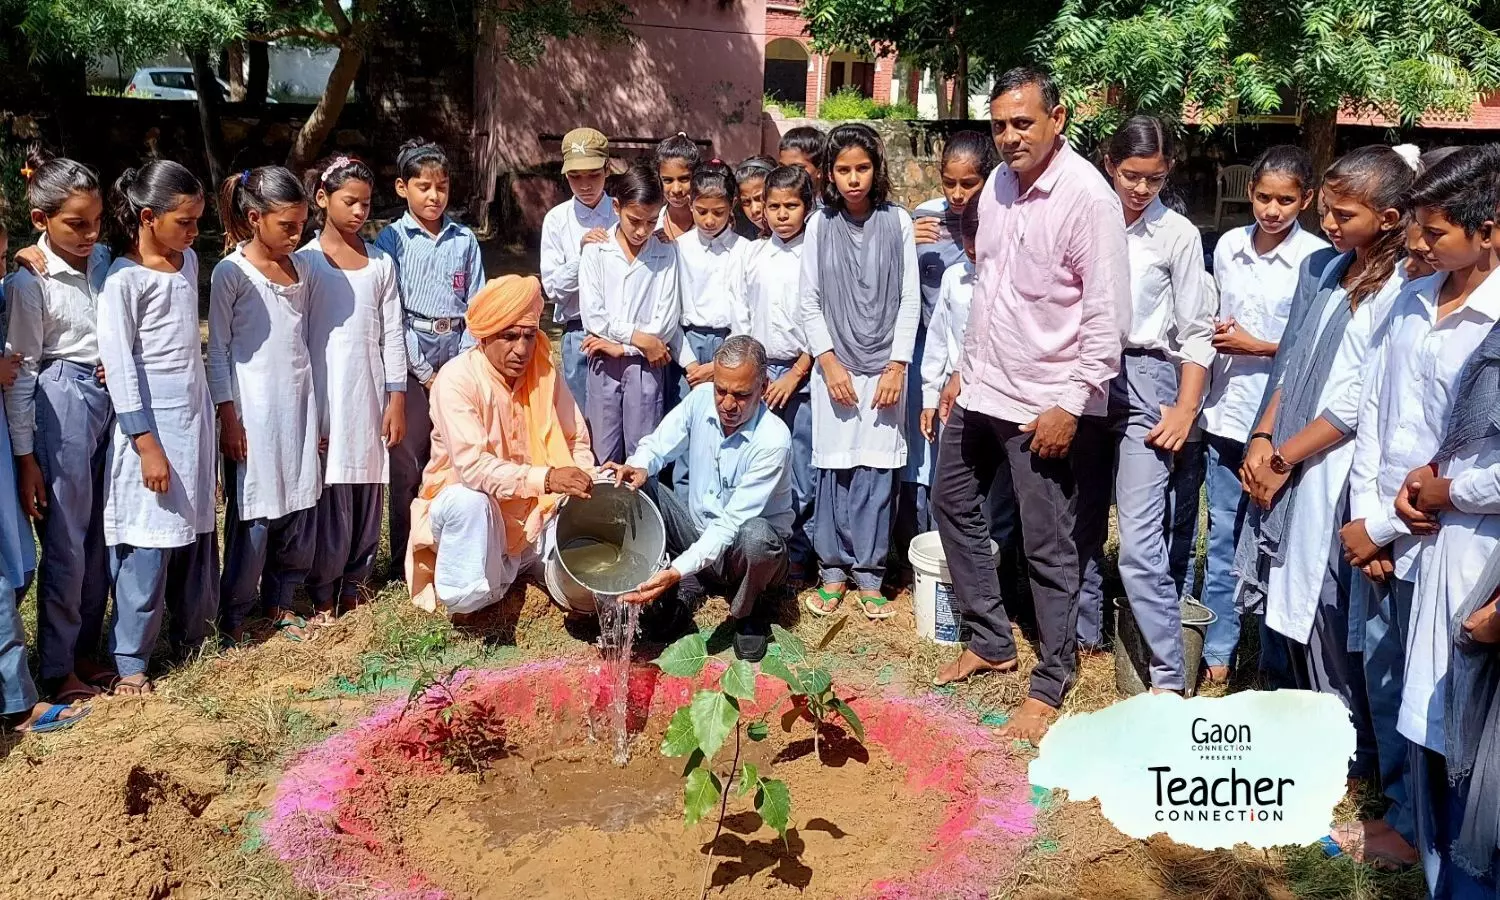 A school teacher has planted nearly 5 million trees and inspired a generation of students